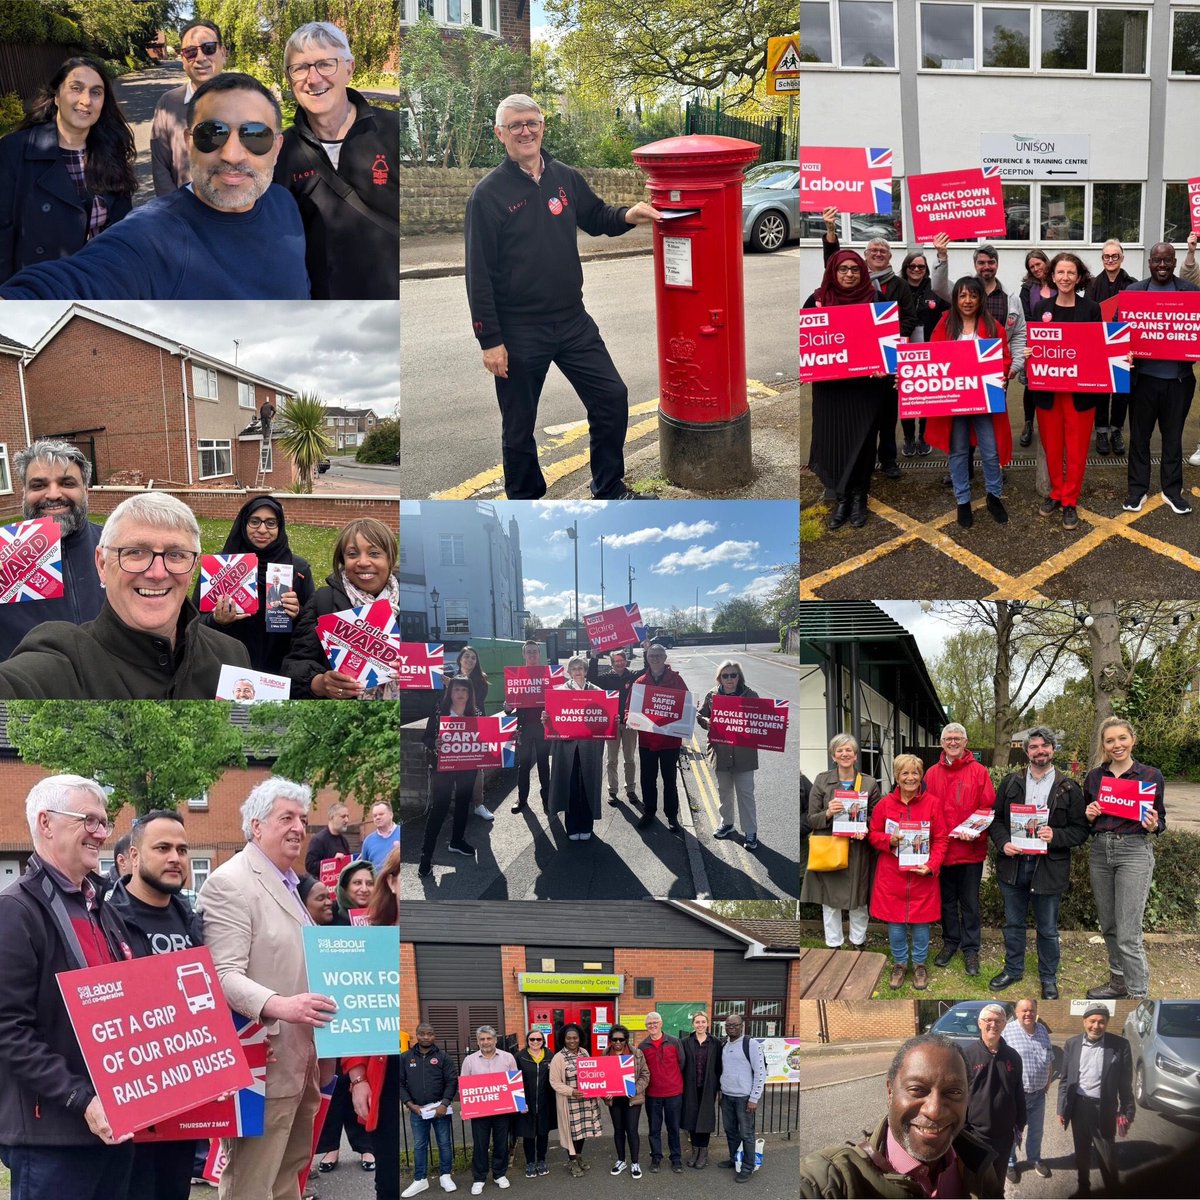 Been out in all weathers these past 4 months. Tomorrow we get the vote out for @ClaireWard4EM & @gary_godden - in January not many people knew about these elections! Now awareness is higher but democracy matters so please vote (remember photo ID) & please Vote Labour 🌹